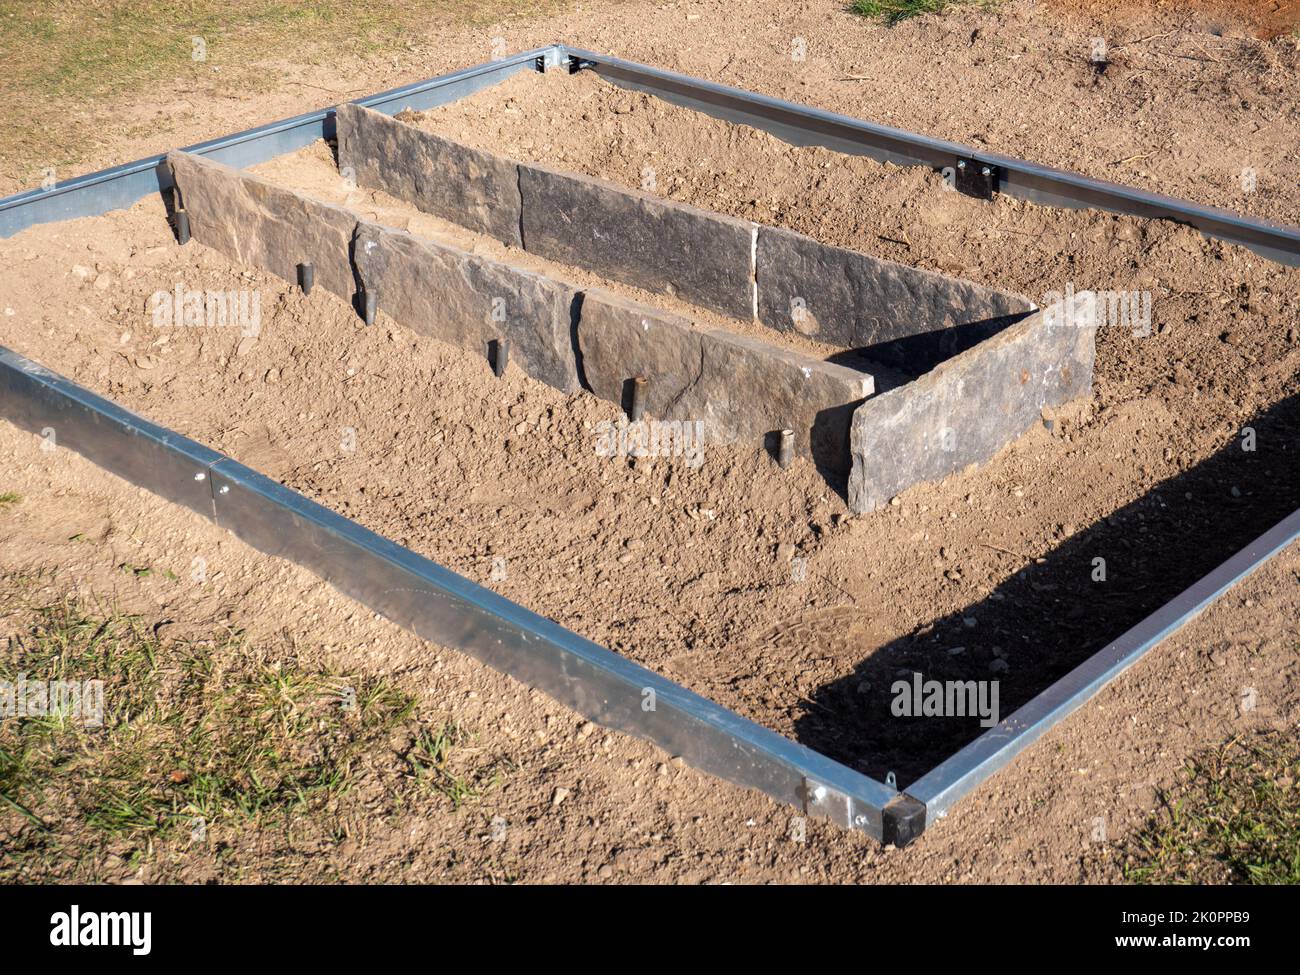 Foundation of a greenhouse in the garden Stock Photo